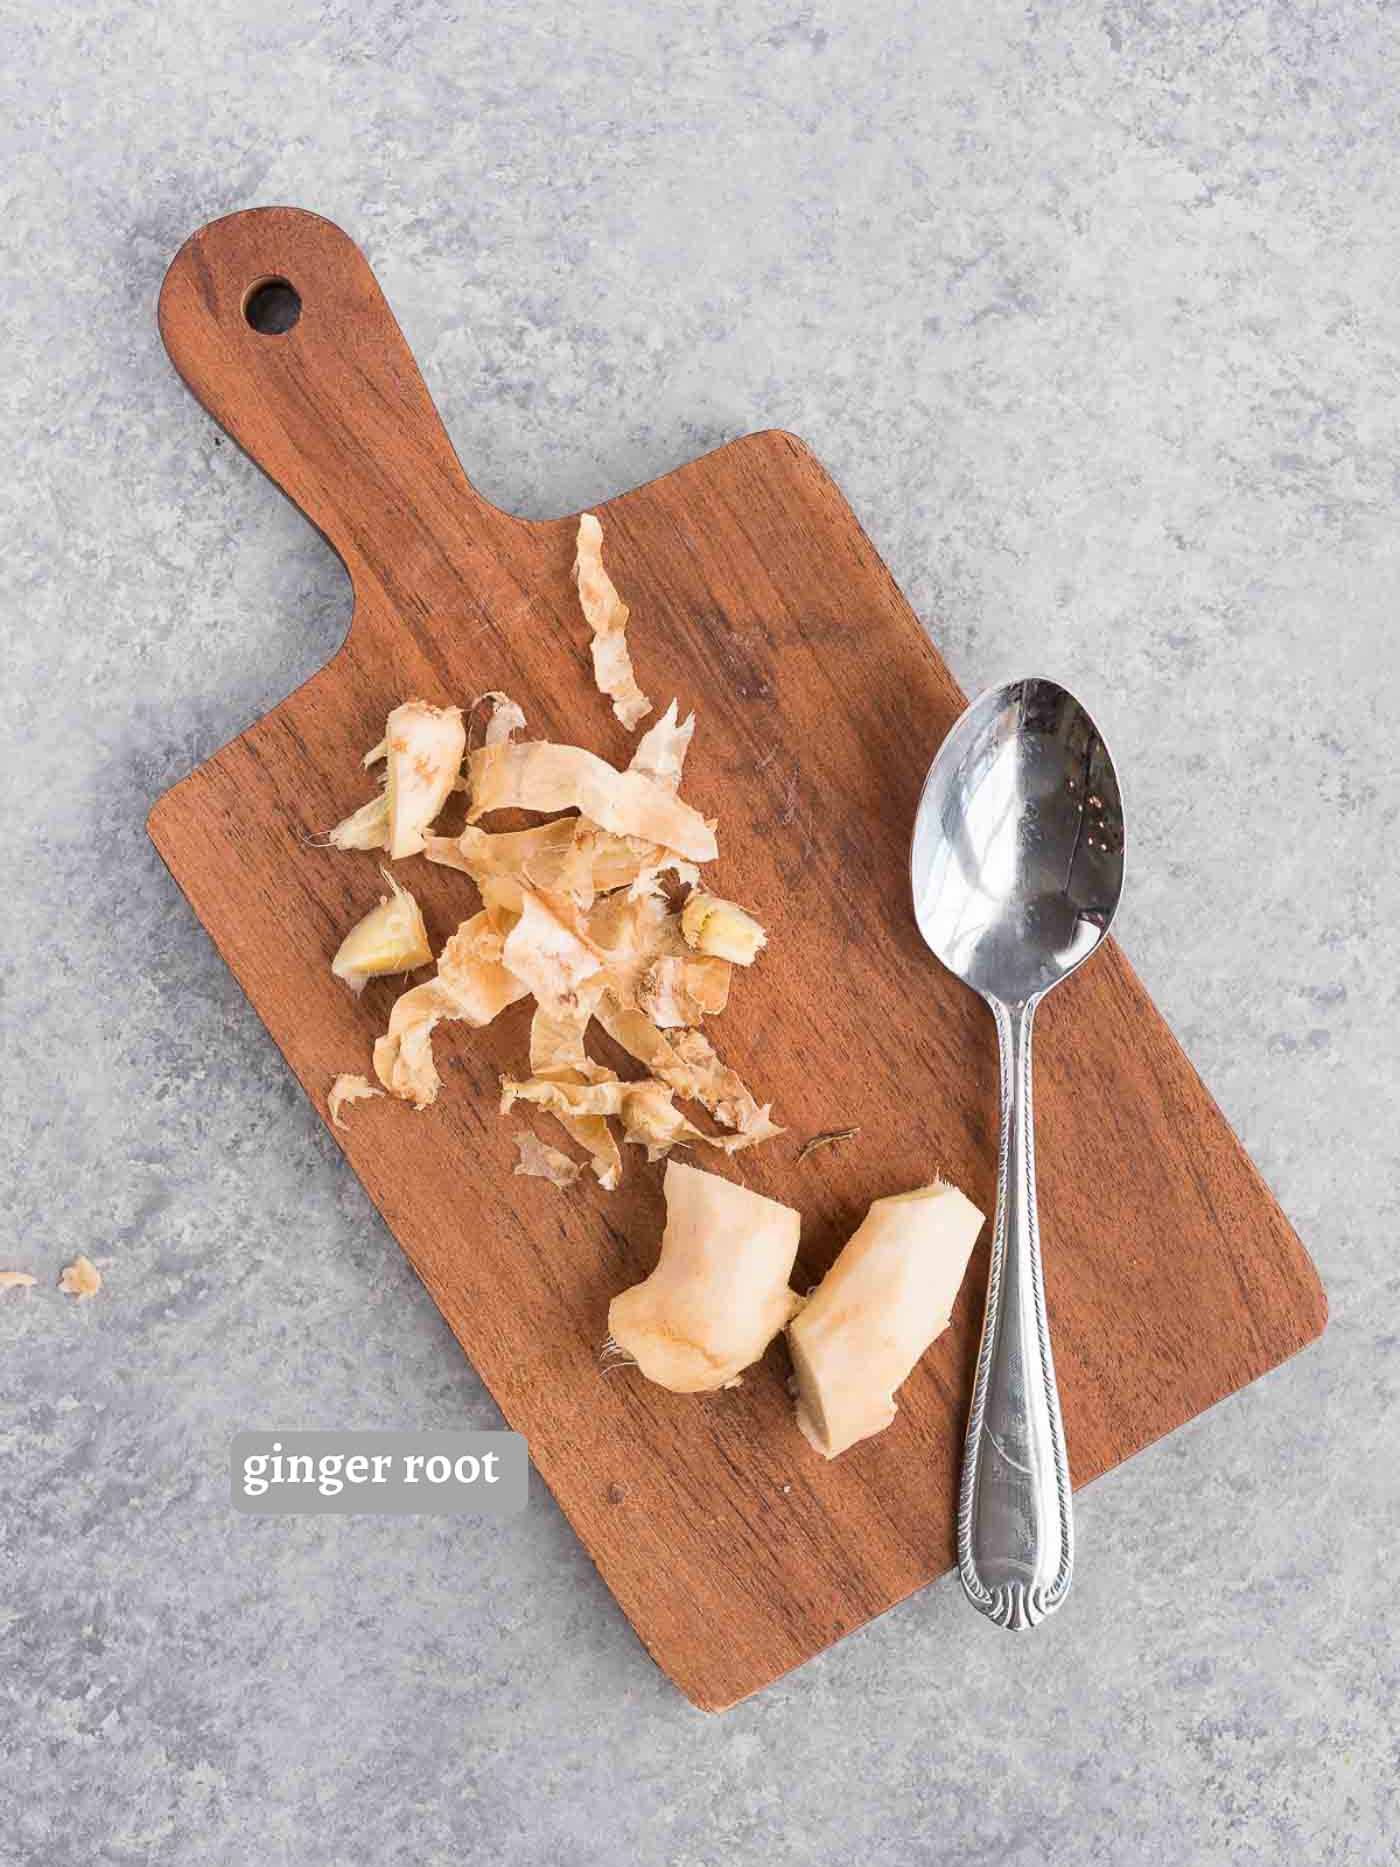 peeled ginger root on a cutting board